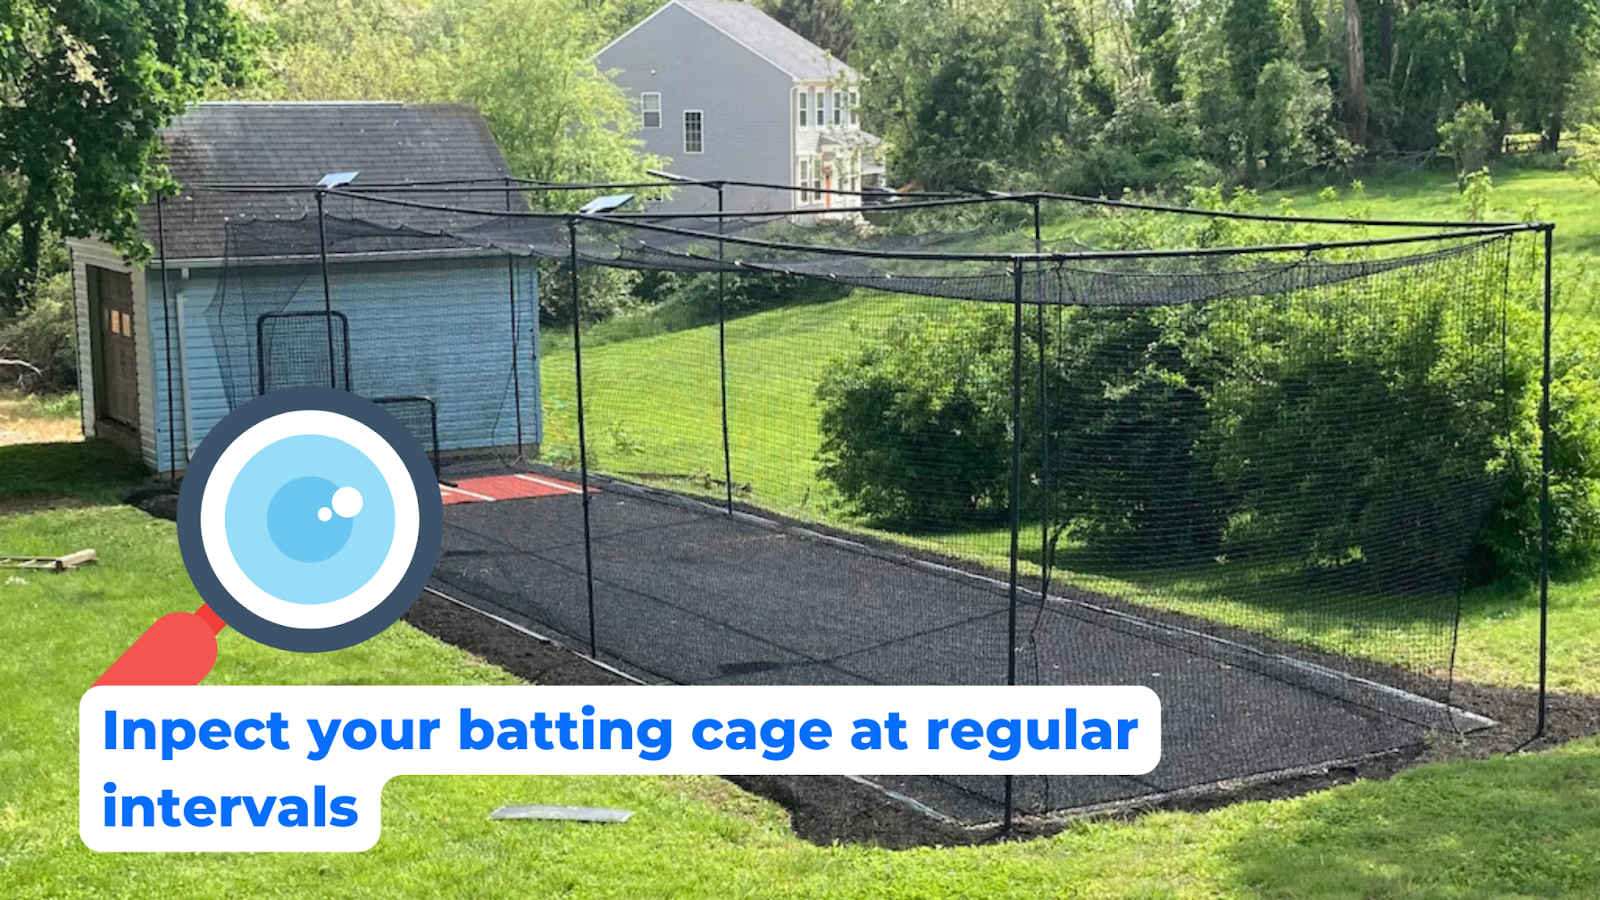 Tips to inspect your backyard batting cage